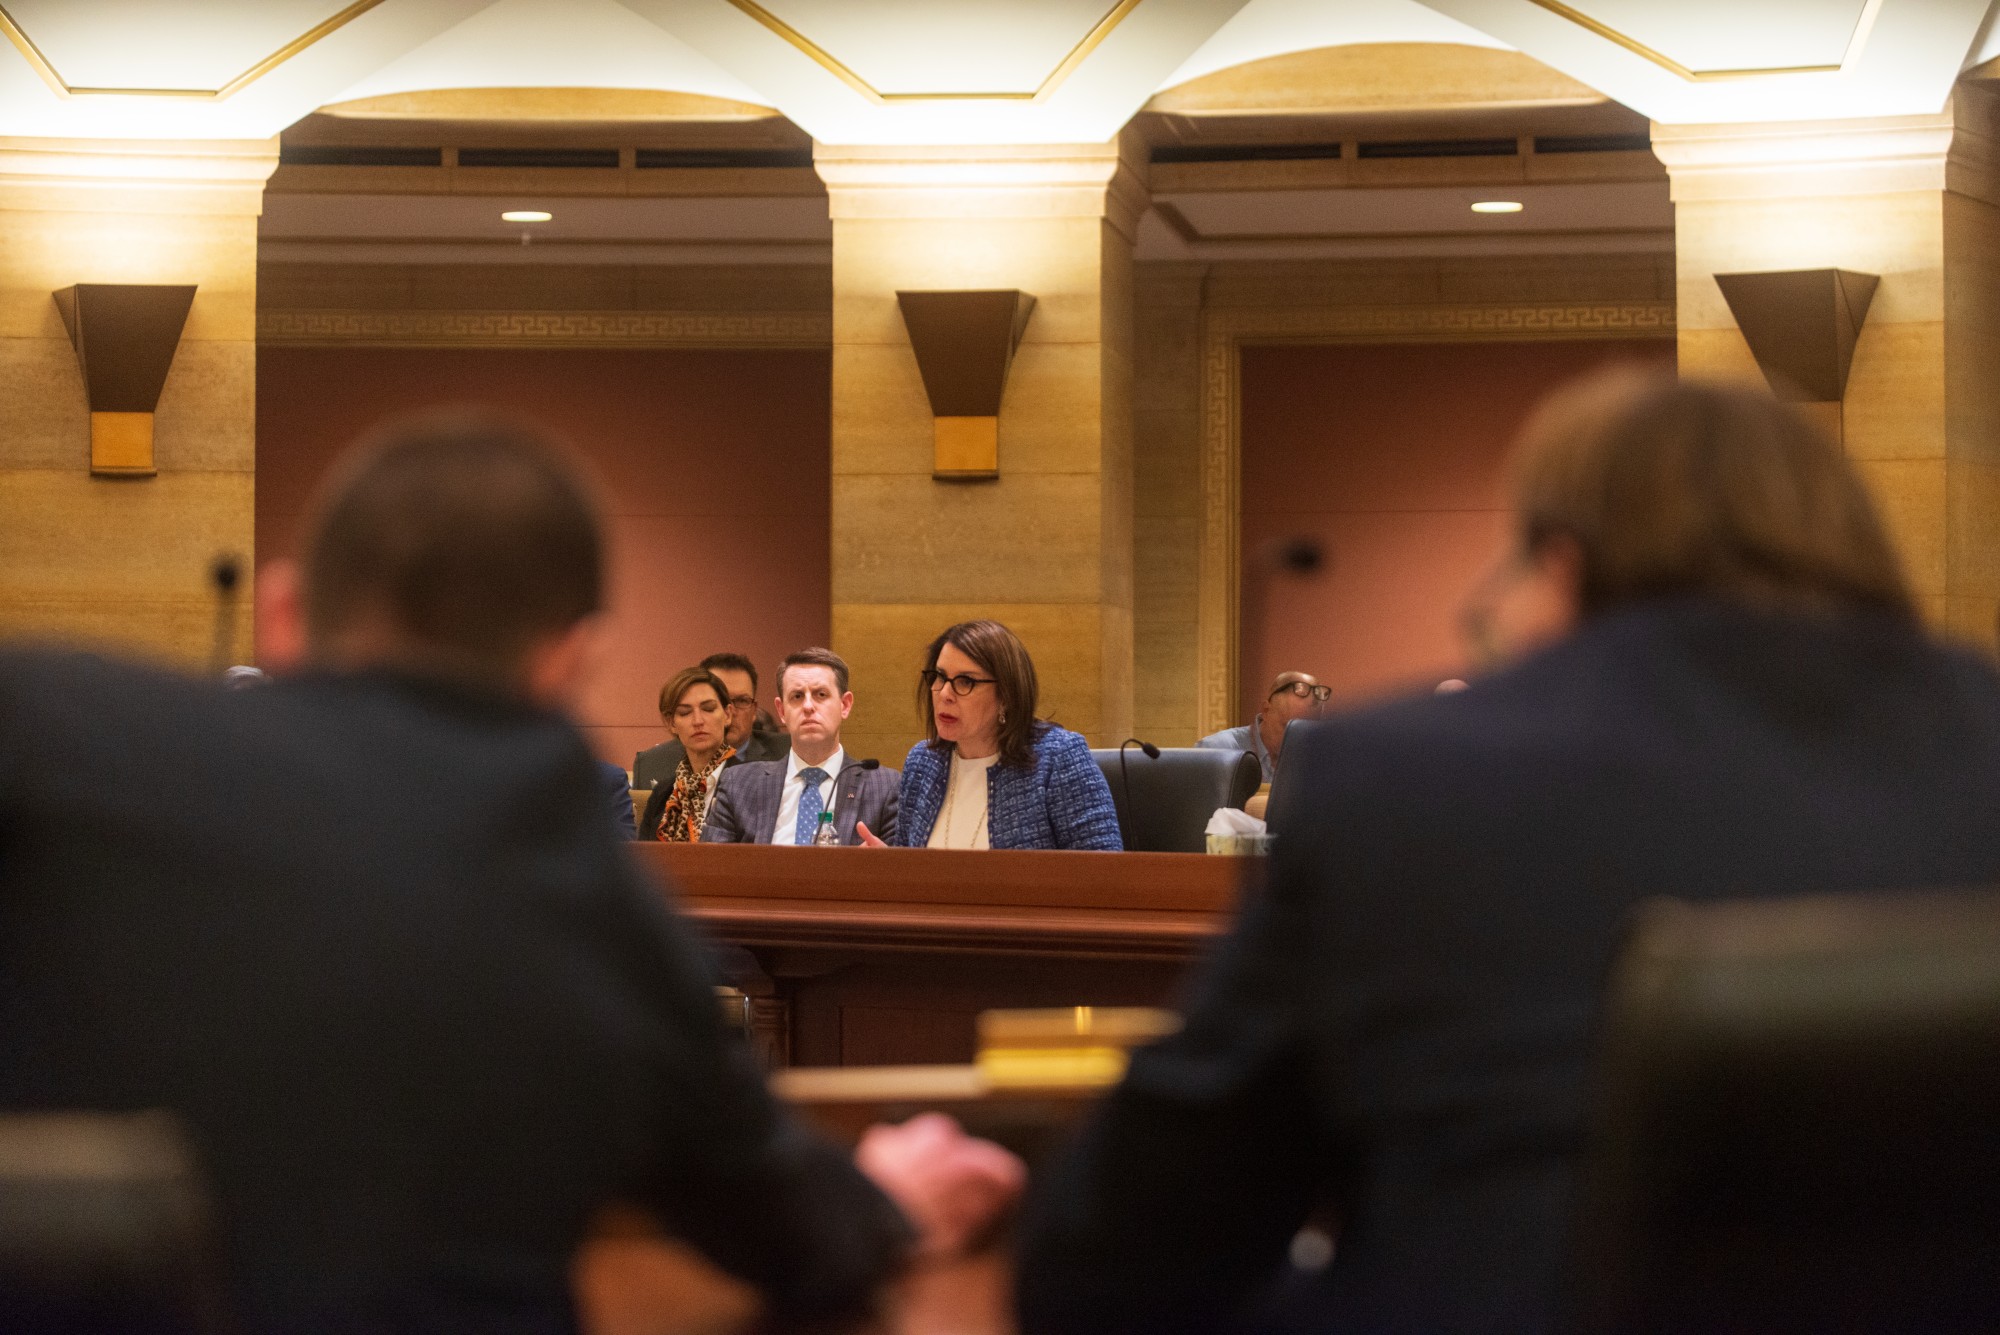 University of Minnesota President Joan Gabel addresses the Minnesota Senate on the Universitys plans to contend with COVID-19, otherwise known as the Coronavirus, at the State Capitol on Tuesday, March 10.